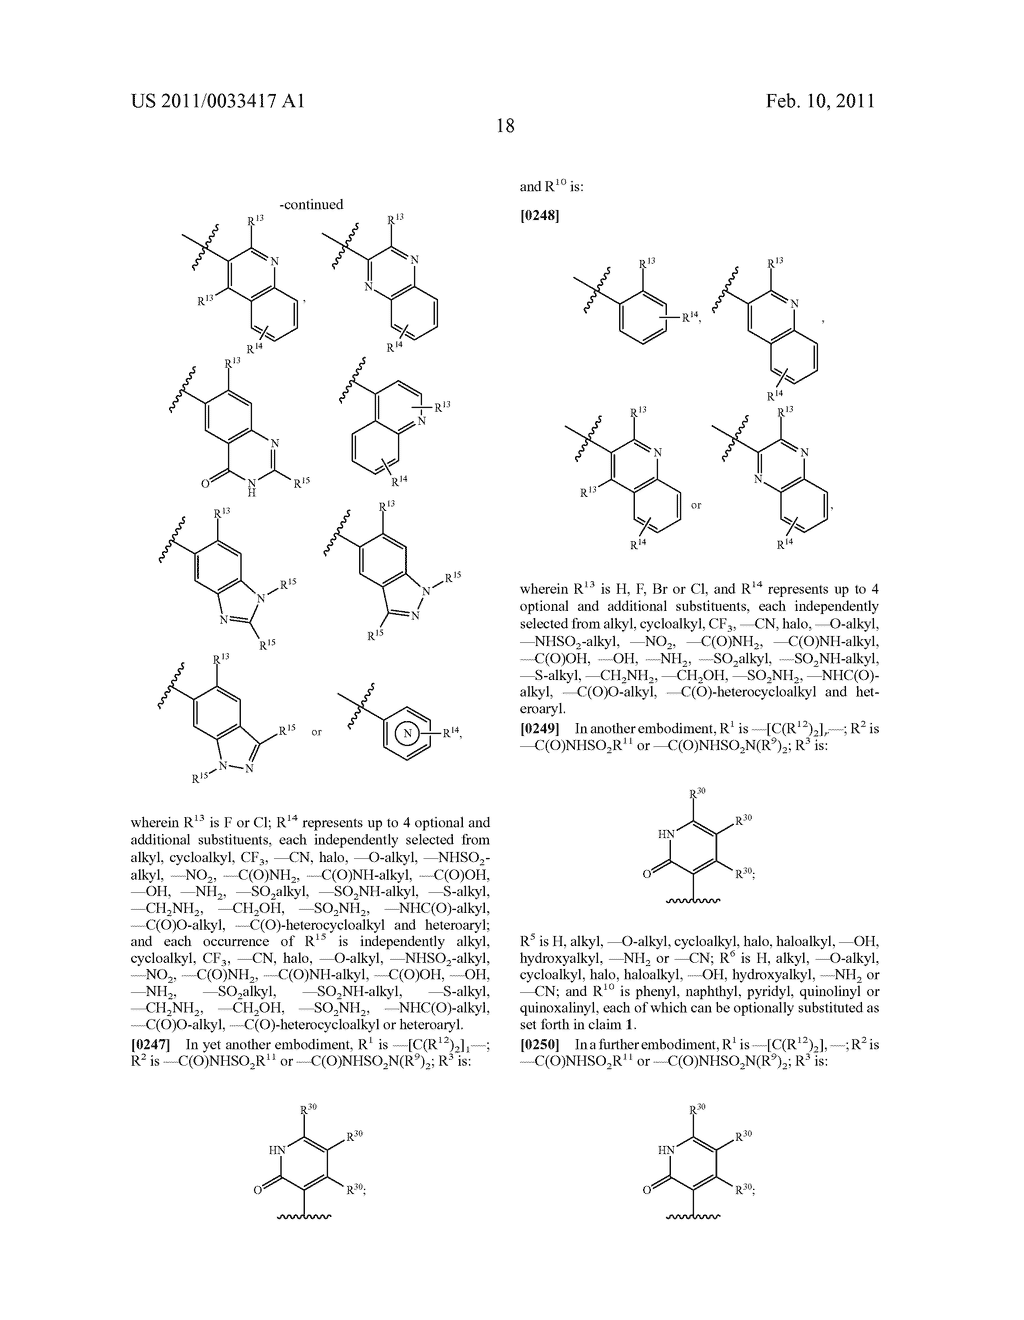 2,3-SUBSTITUTED INDOLE DERIVATIVES FOR TREATING VIRAL INFECTIONS - diagram, schematic, and image 19